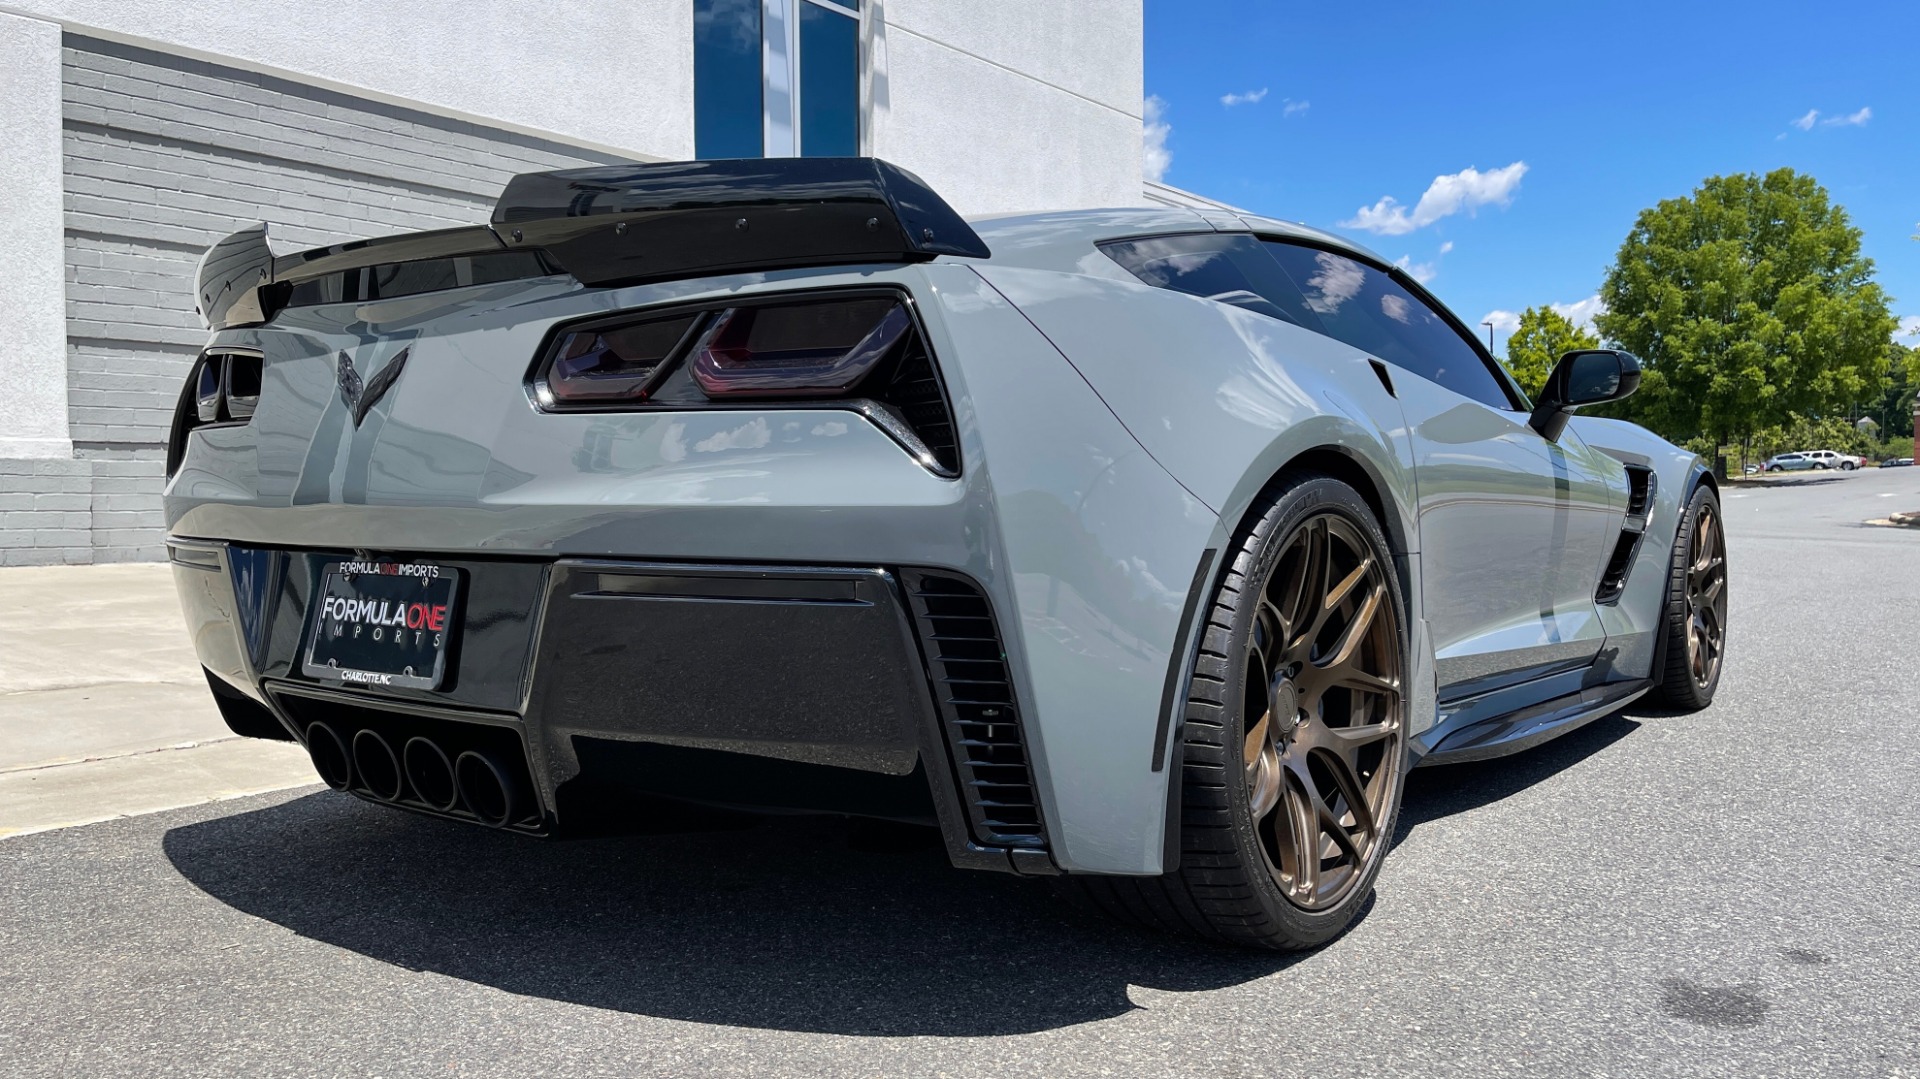 Used 2019 Chevrolet CORVETTE GRAND SPORT 3LT / SUPERCHARGED 6.2L V8 / NAV / REARVIEW for sale Sold at Formula Imports in Charlotte NC 28227 4